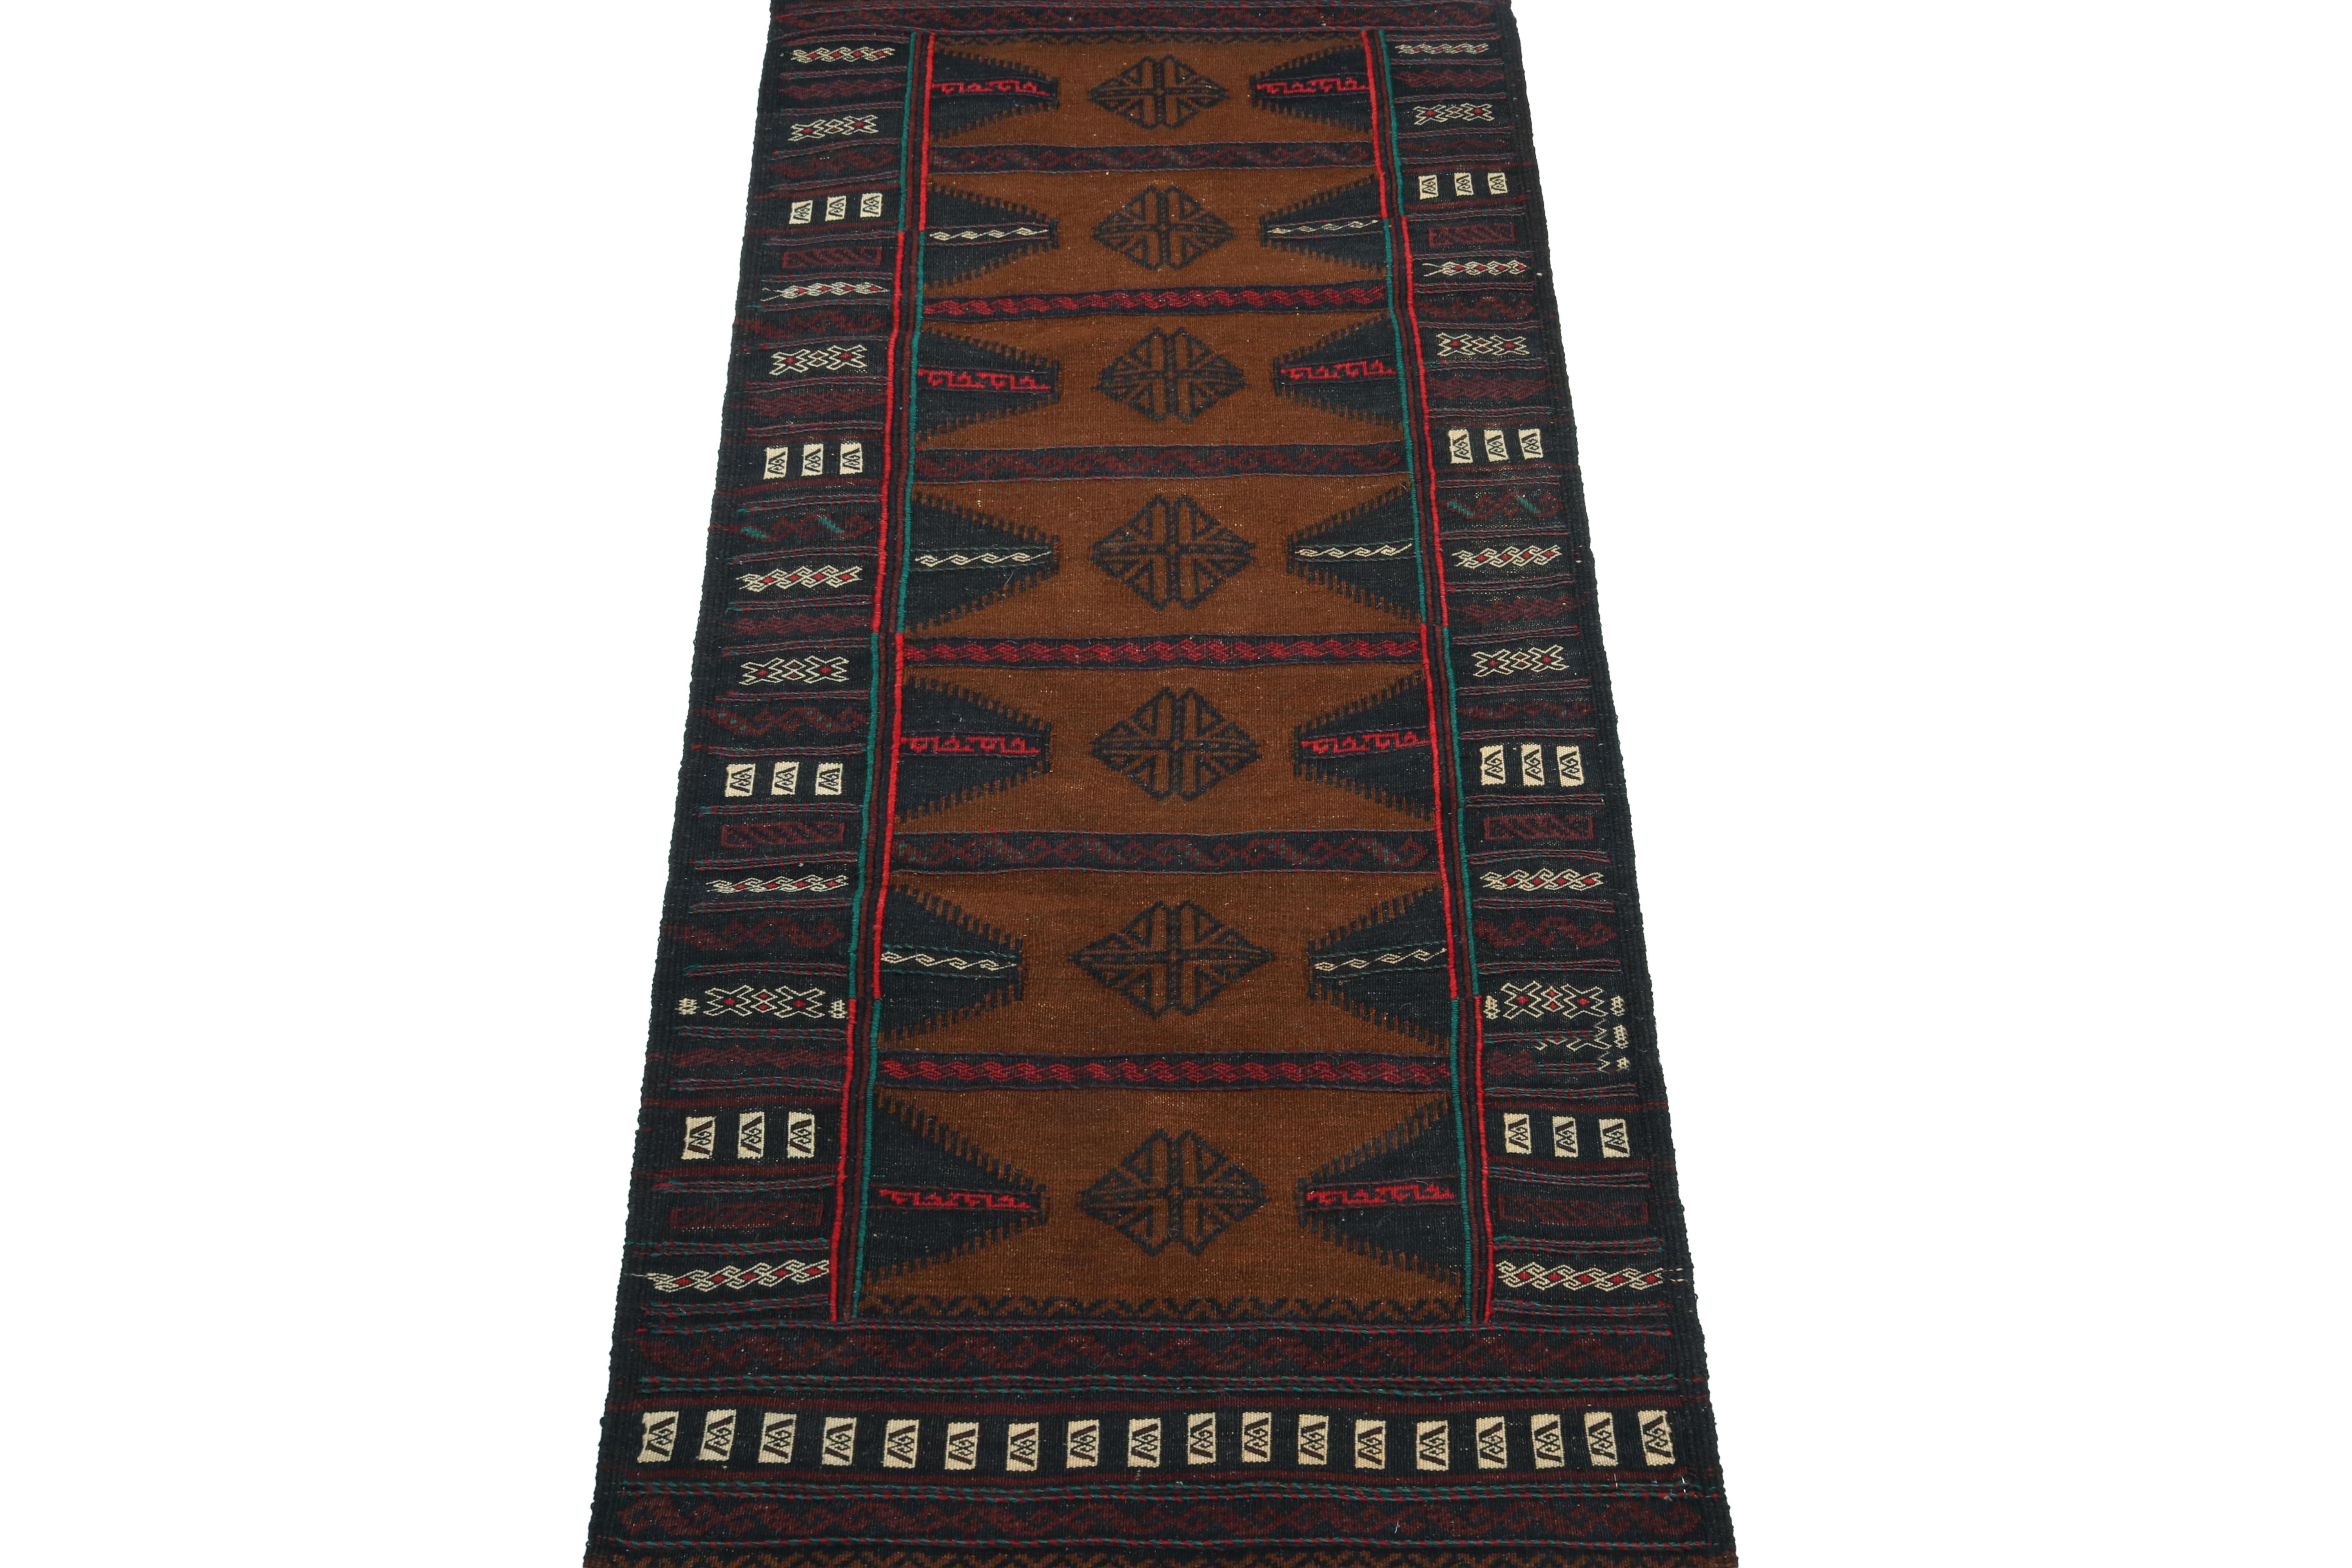 This vintage 3x5 Persian kilim rug is handwoven in wool, and originates circa 1950-1960.

Further on the Design:

The design prefers a brown open field with navy borders and vibrant red and teal accents in its medallions and geometric patterns.